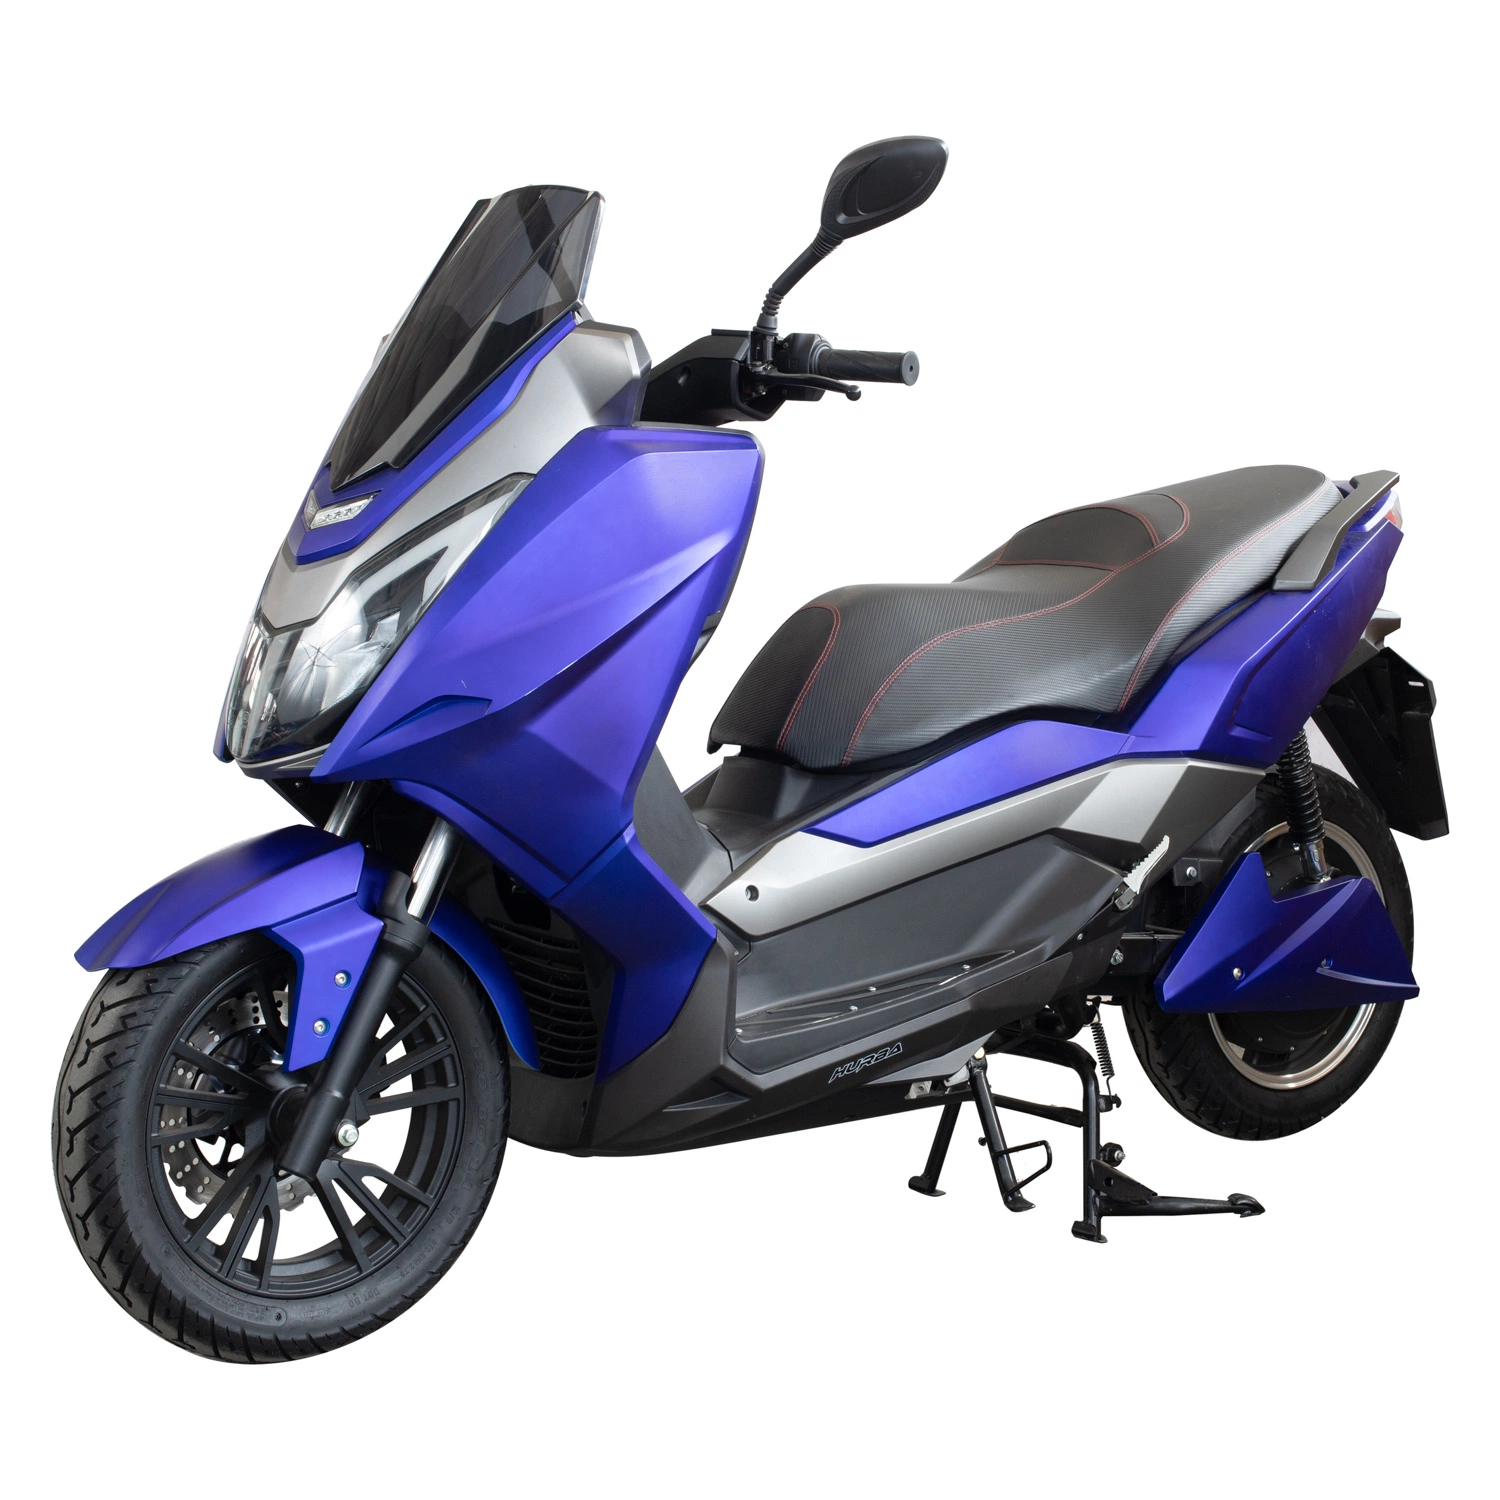 Wholesale China New Design EEC Removable Electric Scooter, High Speed Powerful 5000W Motor Electric Motorcycle, Adult Big Size Moped Bike, Electric Vehicle